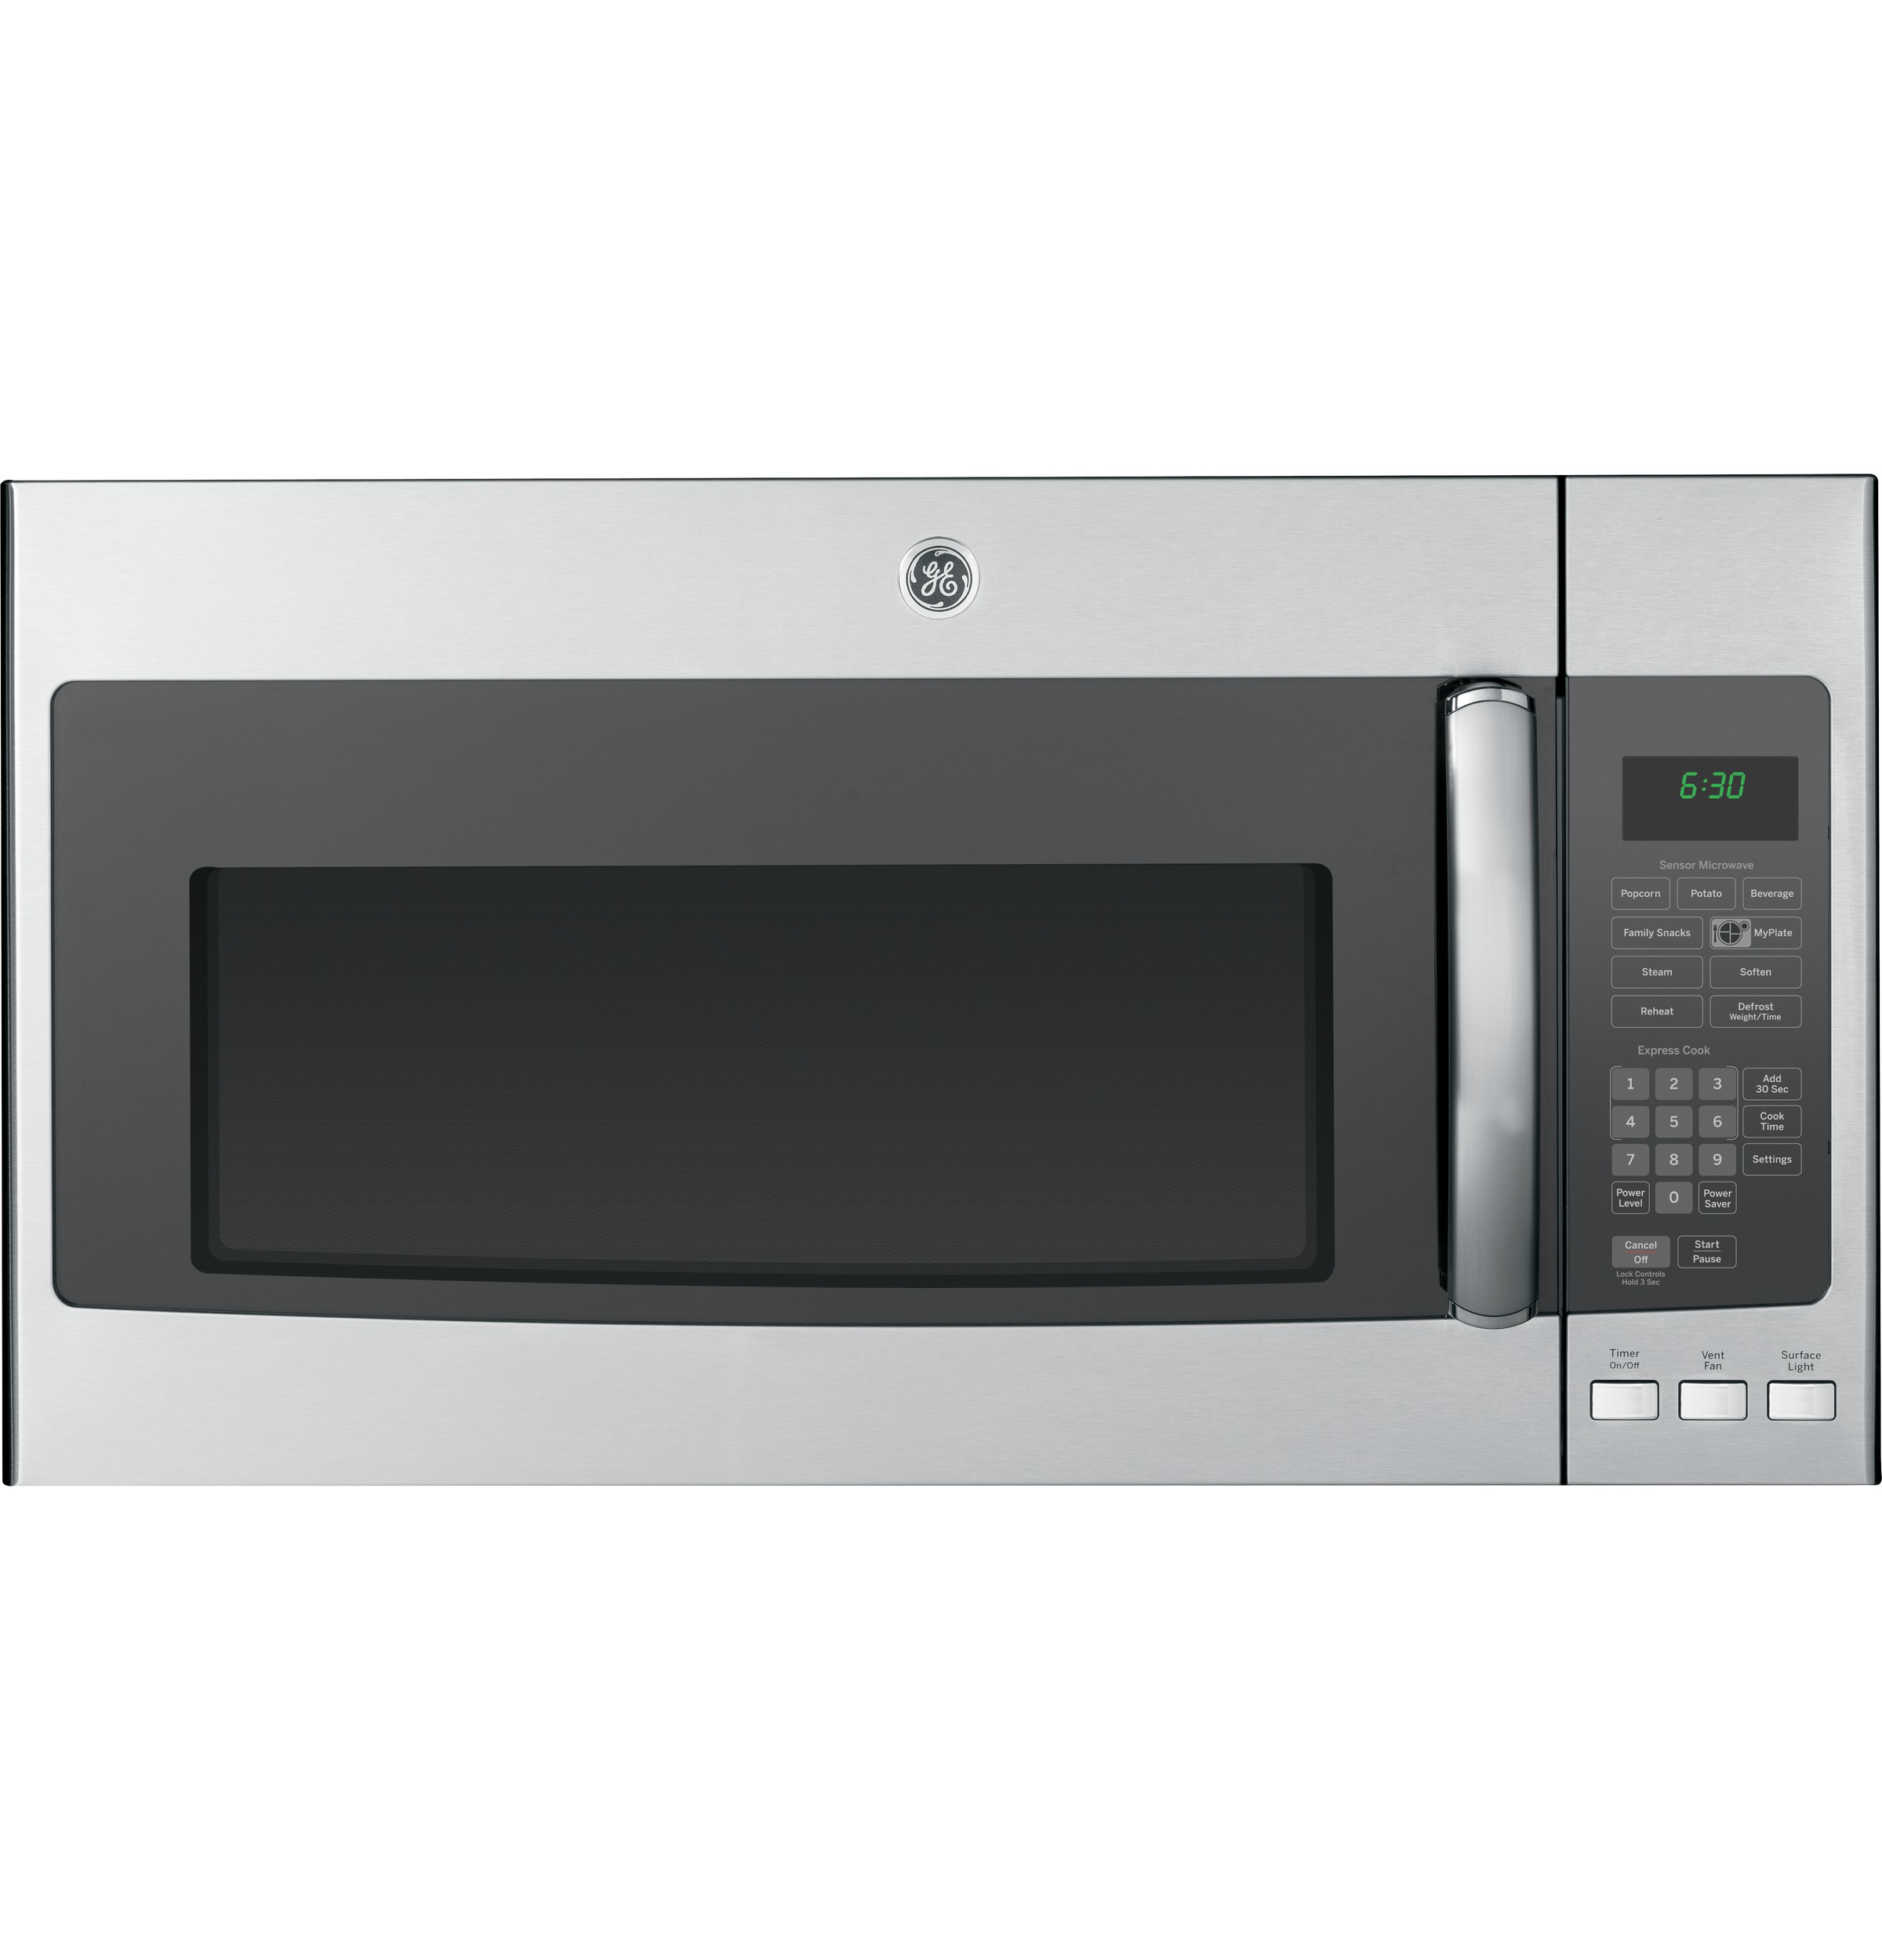 GE Profile™ Series 1.9 Cu. Ft. Over-the-Range Microwave Oven with Recirculating Venting